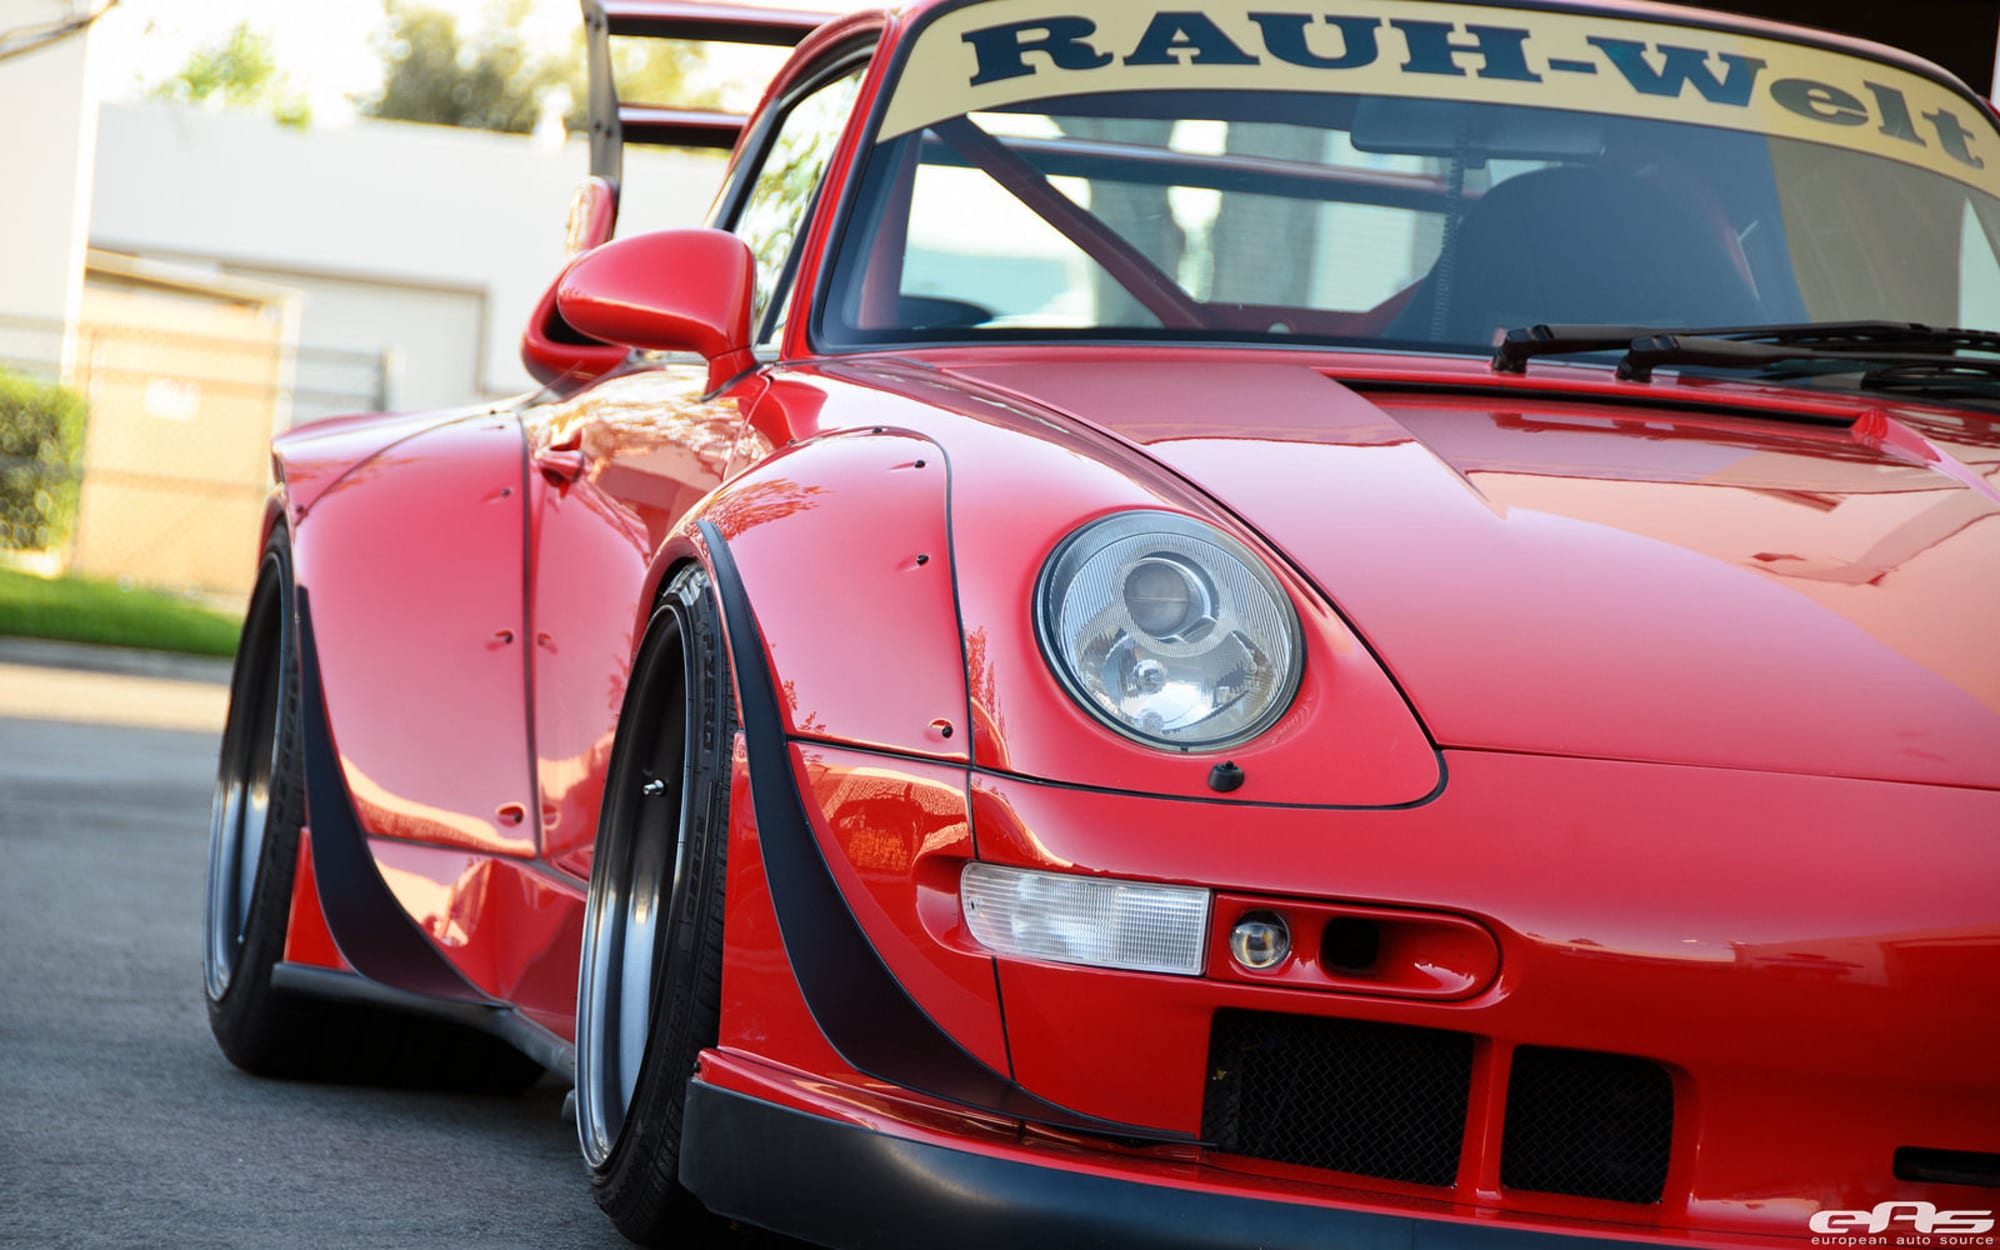 Porsche RWB: Would You Spend $175,000 On This '95 911?